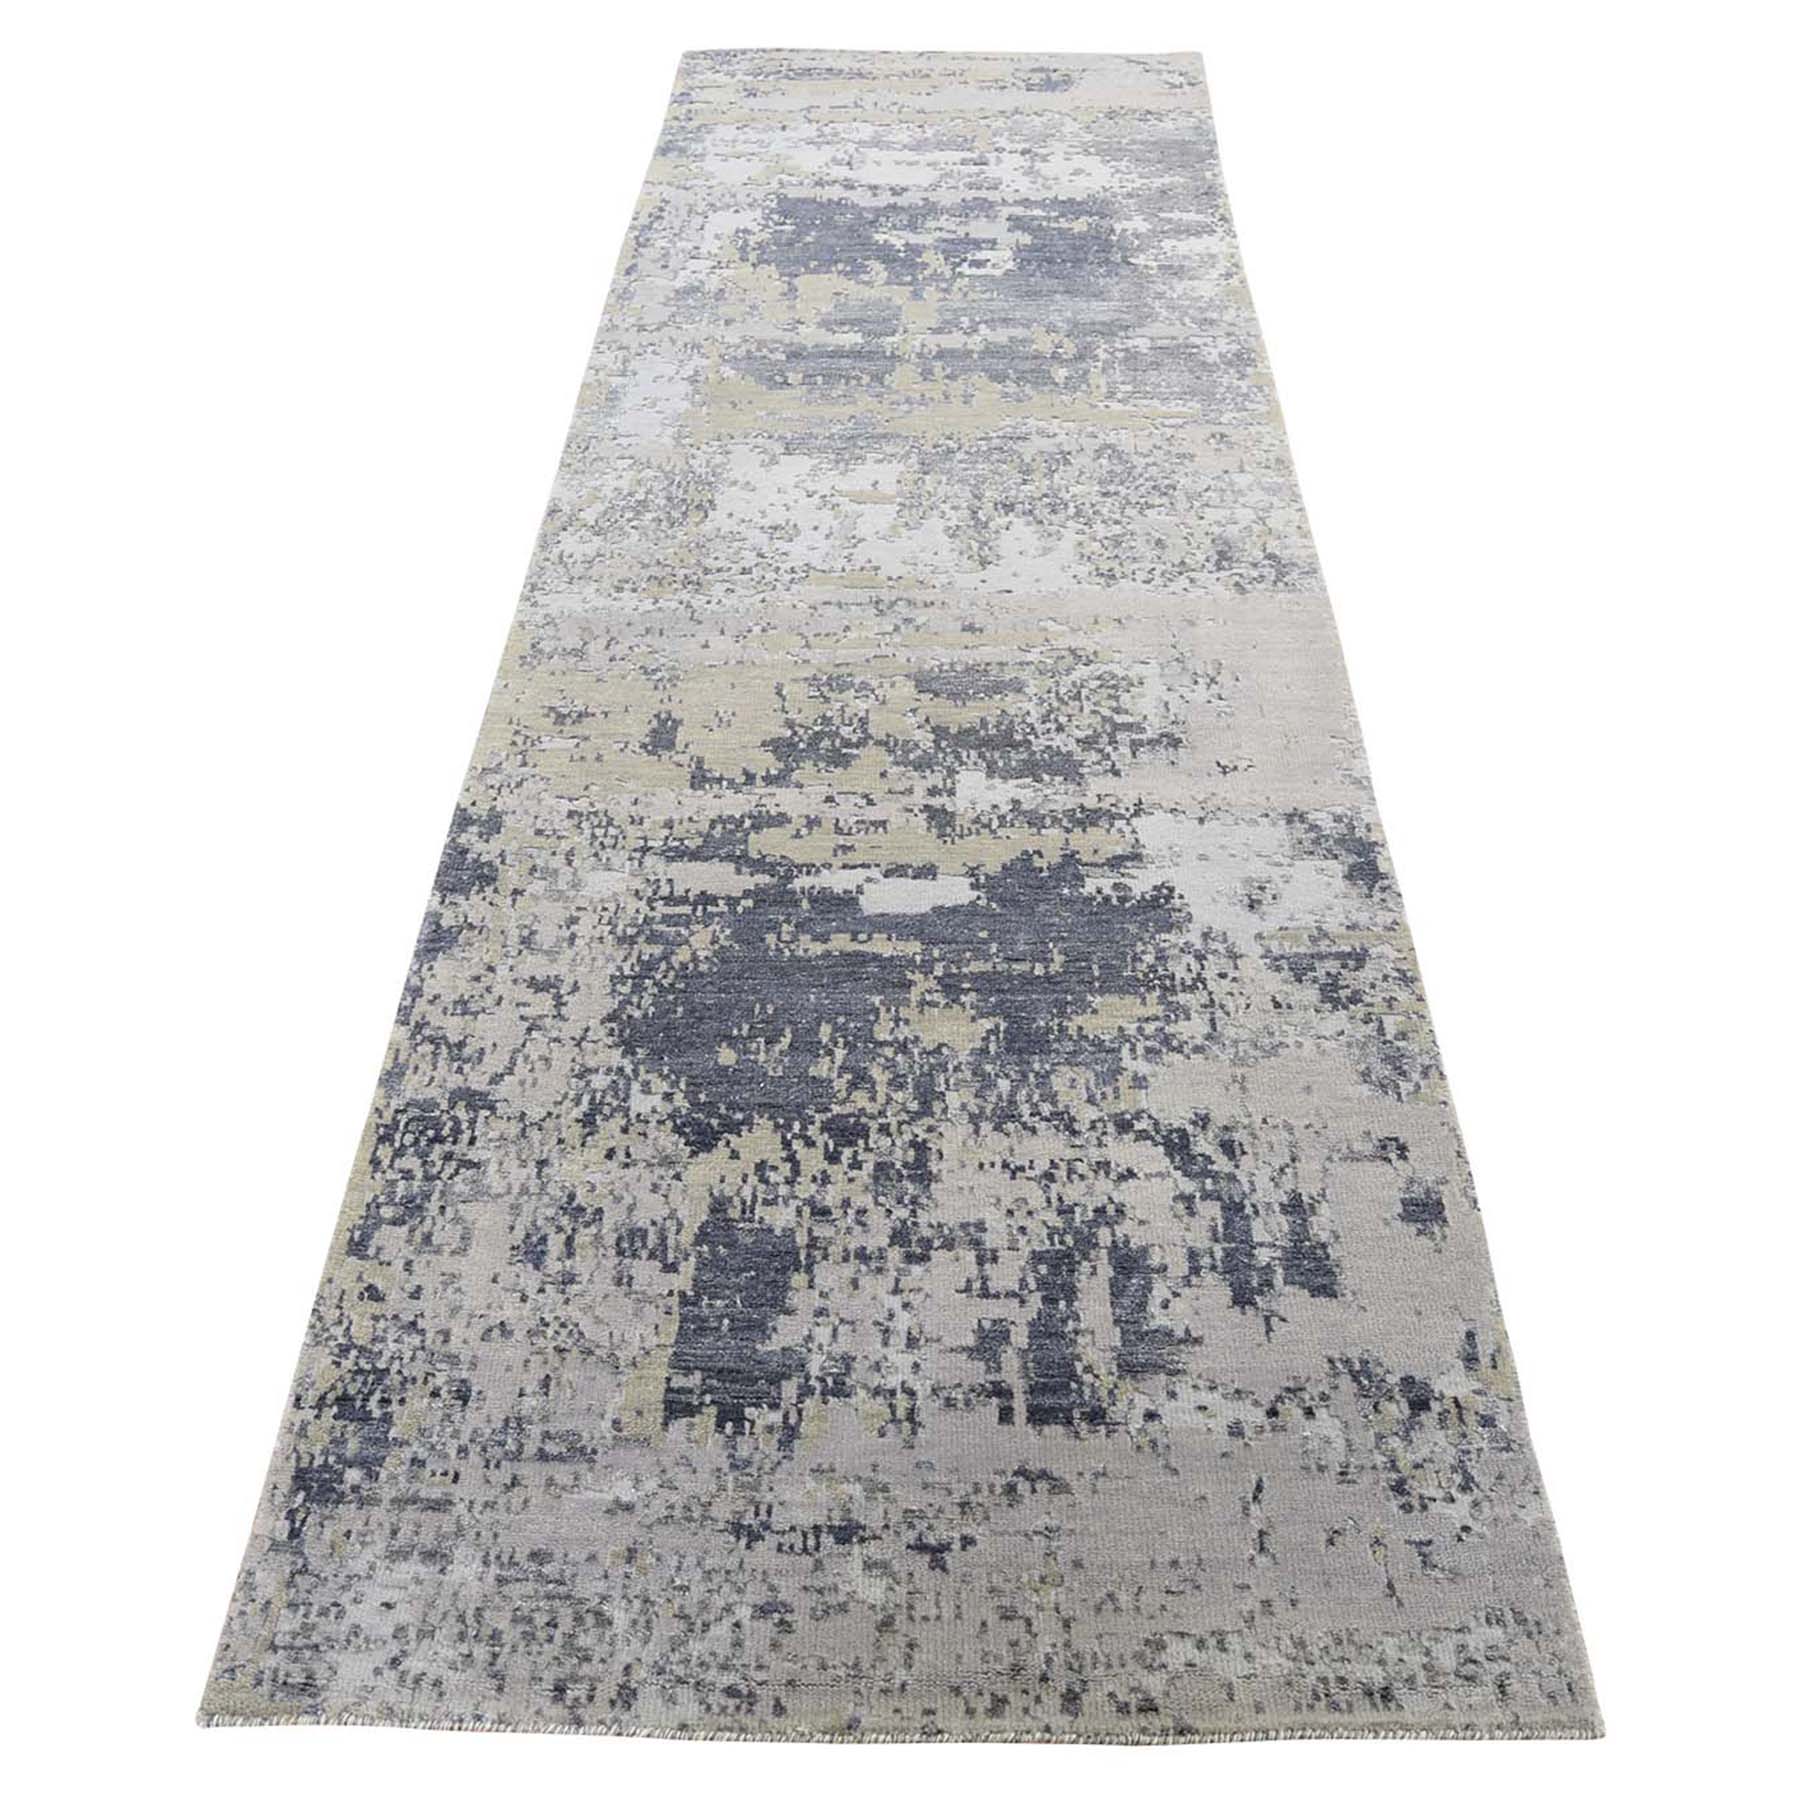 2'8"x10' Hi-Low Pile Abstract Design Wool And Silk Runner Hand Woven Oriental Rug 